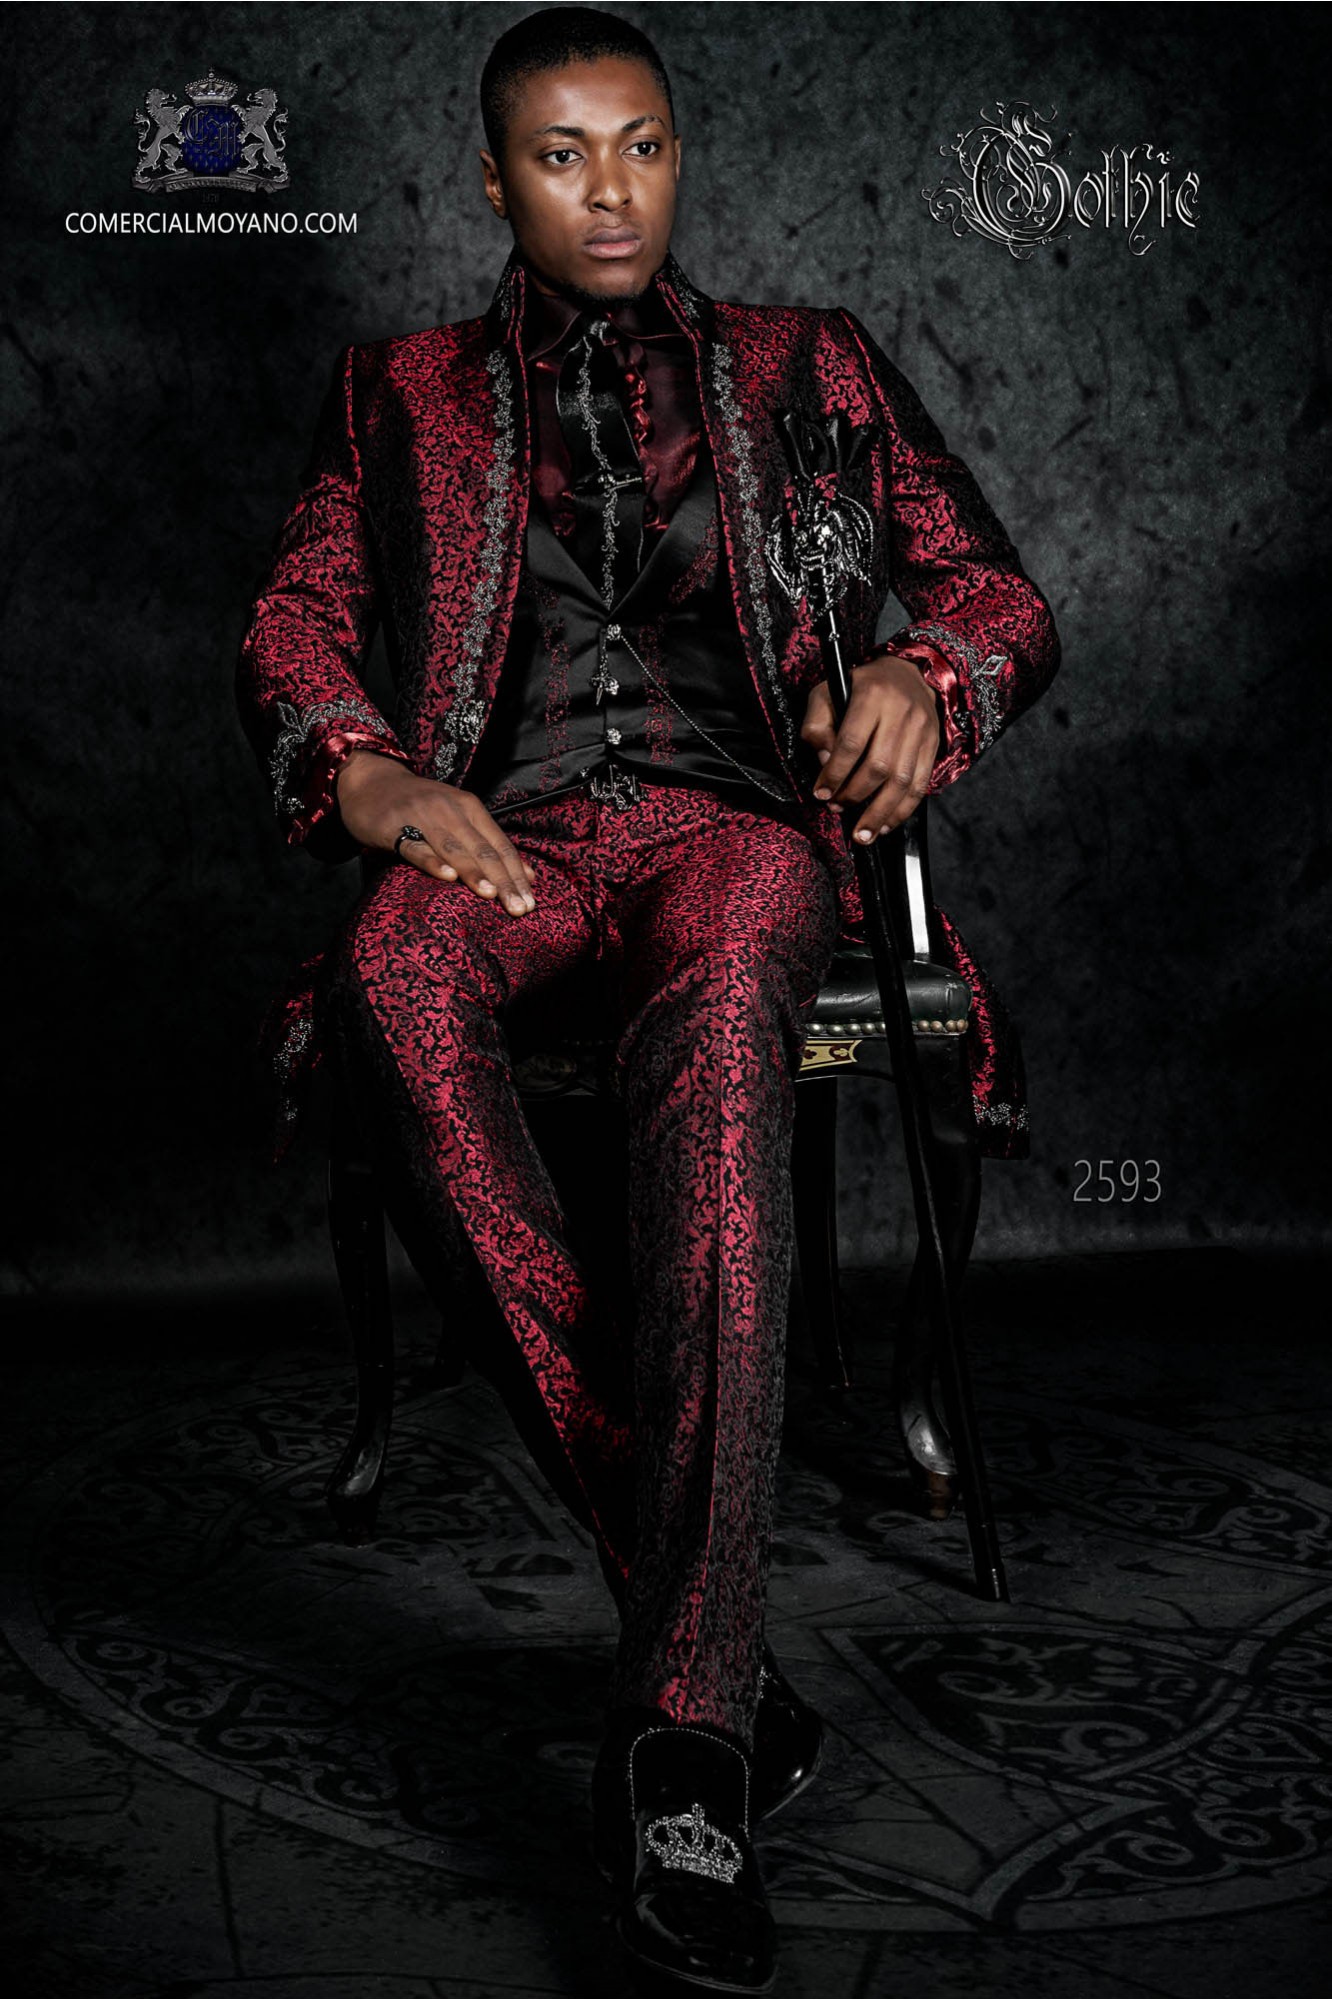 Baroque groom suit, vintage Napoleon collar frock coat in red jacquard fabric with silver embroidery and crystal clasp model 2593 Mario Moyano